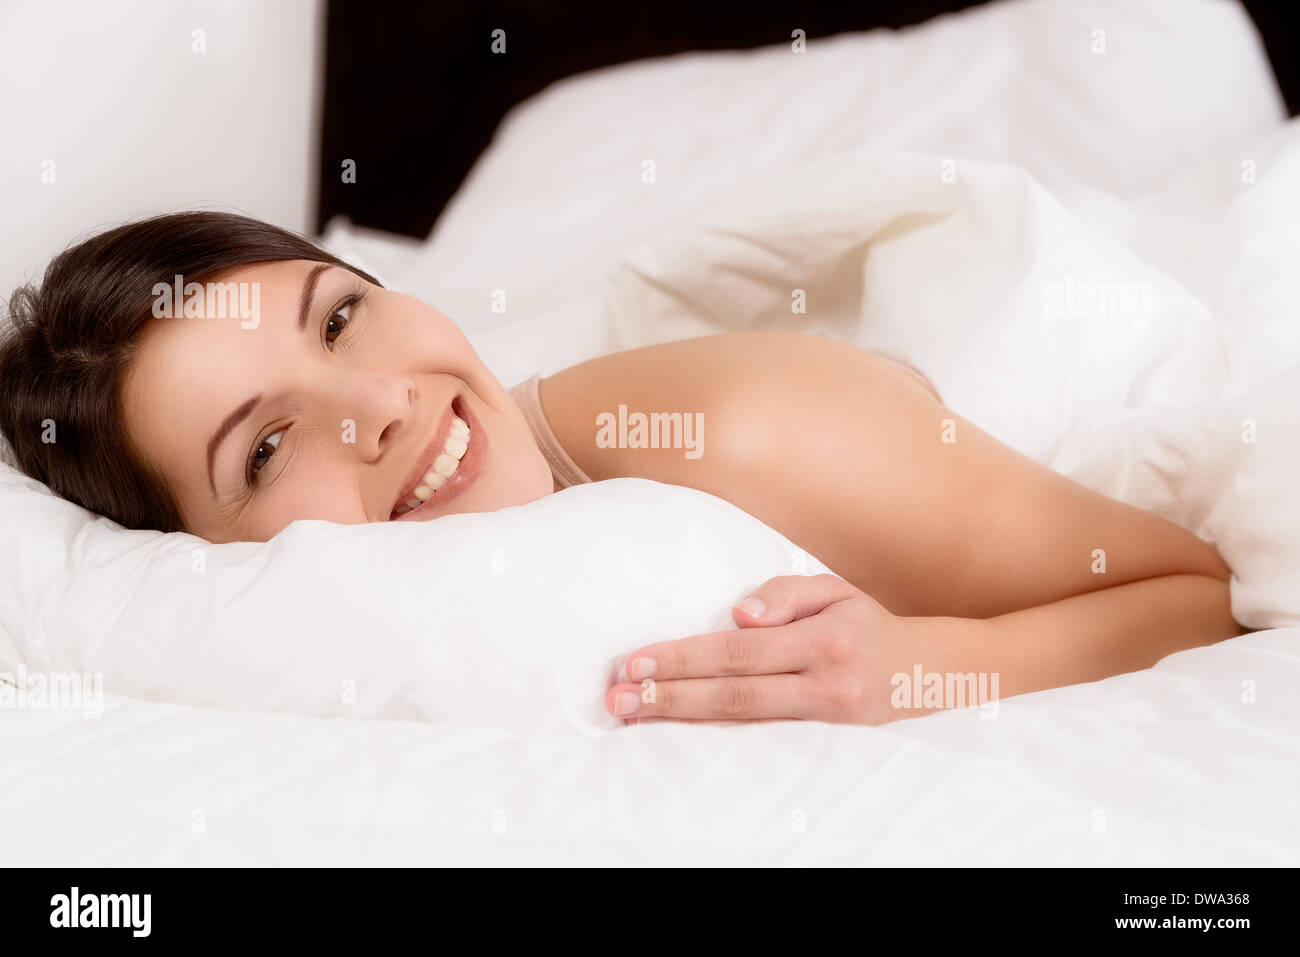 Smiling healthy rejuvenated young woman snuggling down between her pillows in bed giving the camera a wide beaming joyful smile Stock Photo